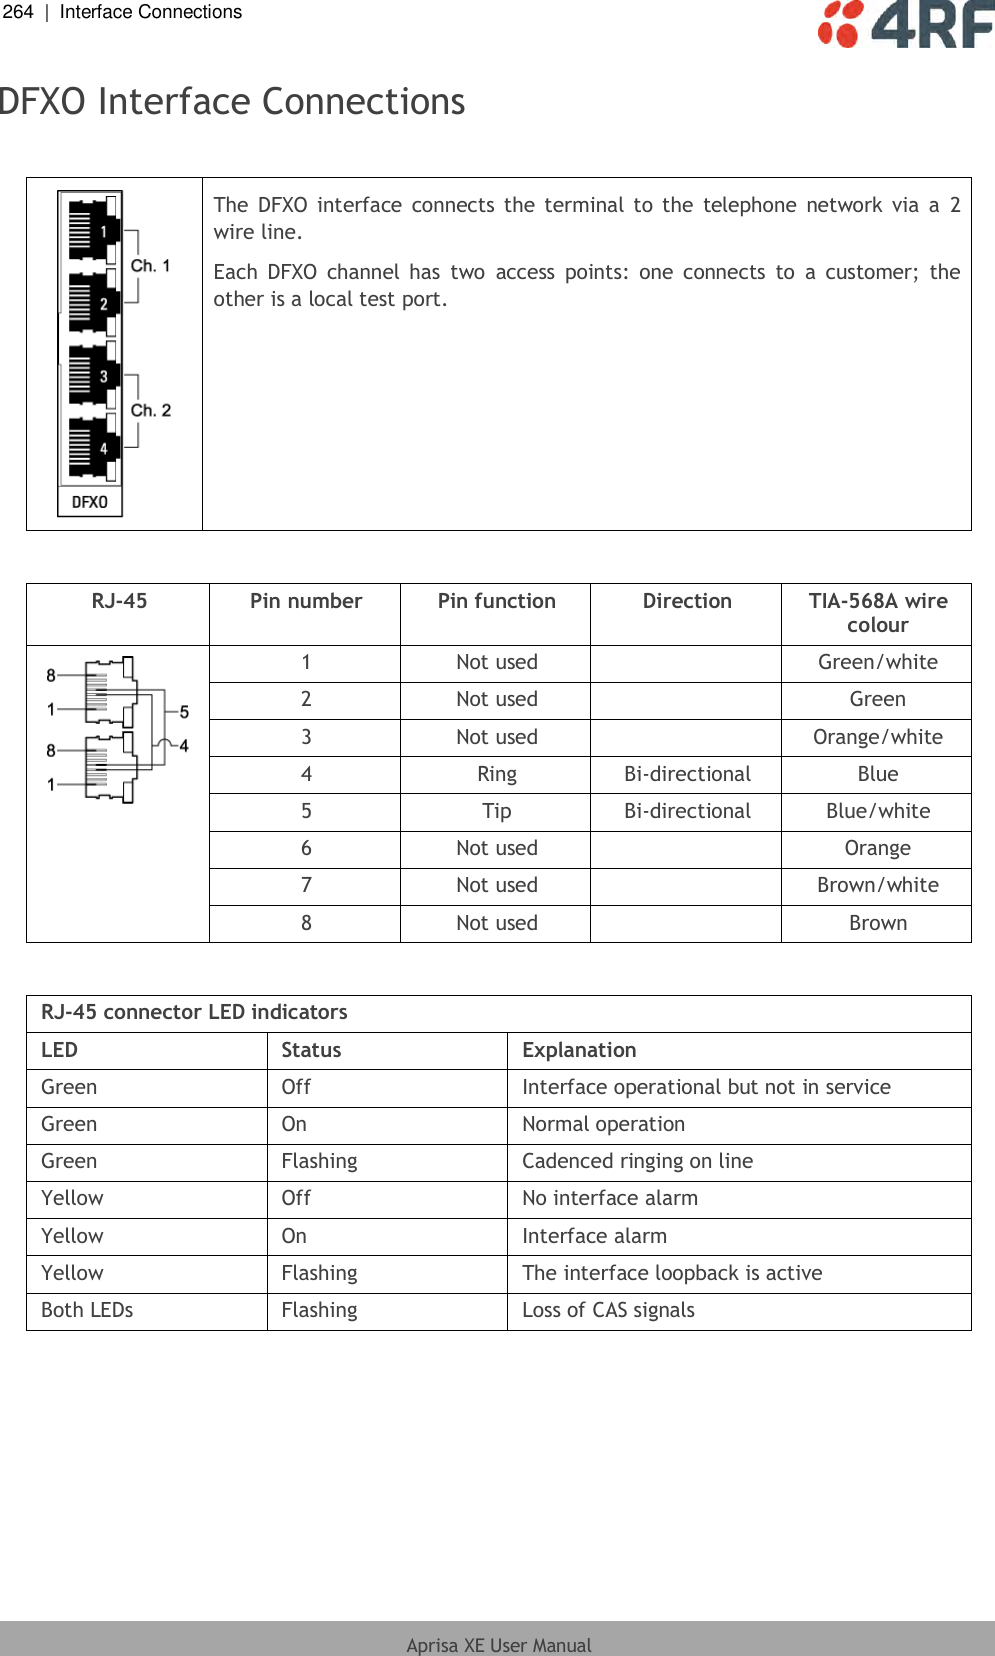 264  |  Interface Connections   Aprisa XE User Manual  DFXO Interface Connections   The  DFXO  interface connects the terminal to  the  telephone  network  via  a  2 wire line. Each  DFXO  channel  has  two  access  points:  one  connects  to  a  customer;  the other is a local test port.   RJ-45 Pin number Pin function Direction TIA-568A wire colour  1 Not used  Green/white 2 Not used  Green 3 Not used  Orange/white 4 Ring Bi-directional Blue 5 Tip Bi-directional Blue/white 6 Not used  Orange 7 Not used  Brown/white 8 Not used  Brown  RJ-45 connector LED indicators LED Status Explanation Green Off Interface operational but not in service Green On Normal operation Green Flashing Cadenced ringing on line Yellow Off No interface alarm Yellow On Interface alarm Yellow Flashing The interface loopback is active Both LEDs Flashing Loss of CAS signals   